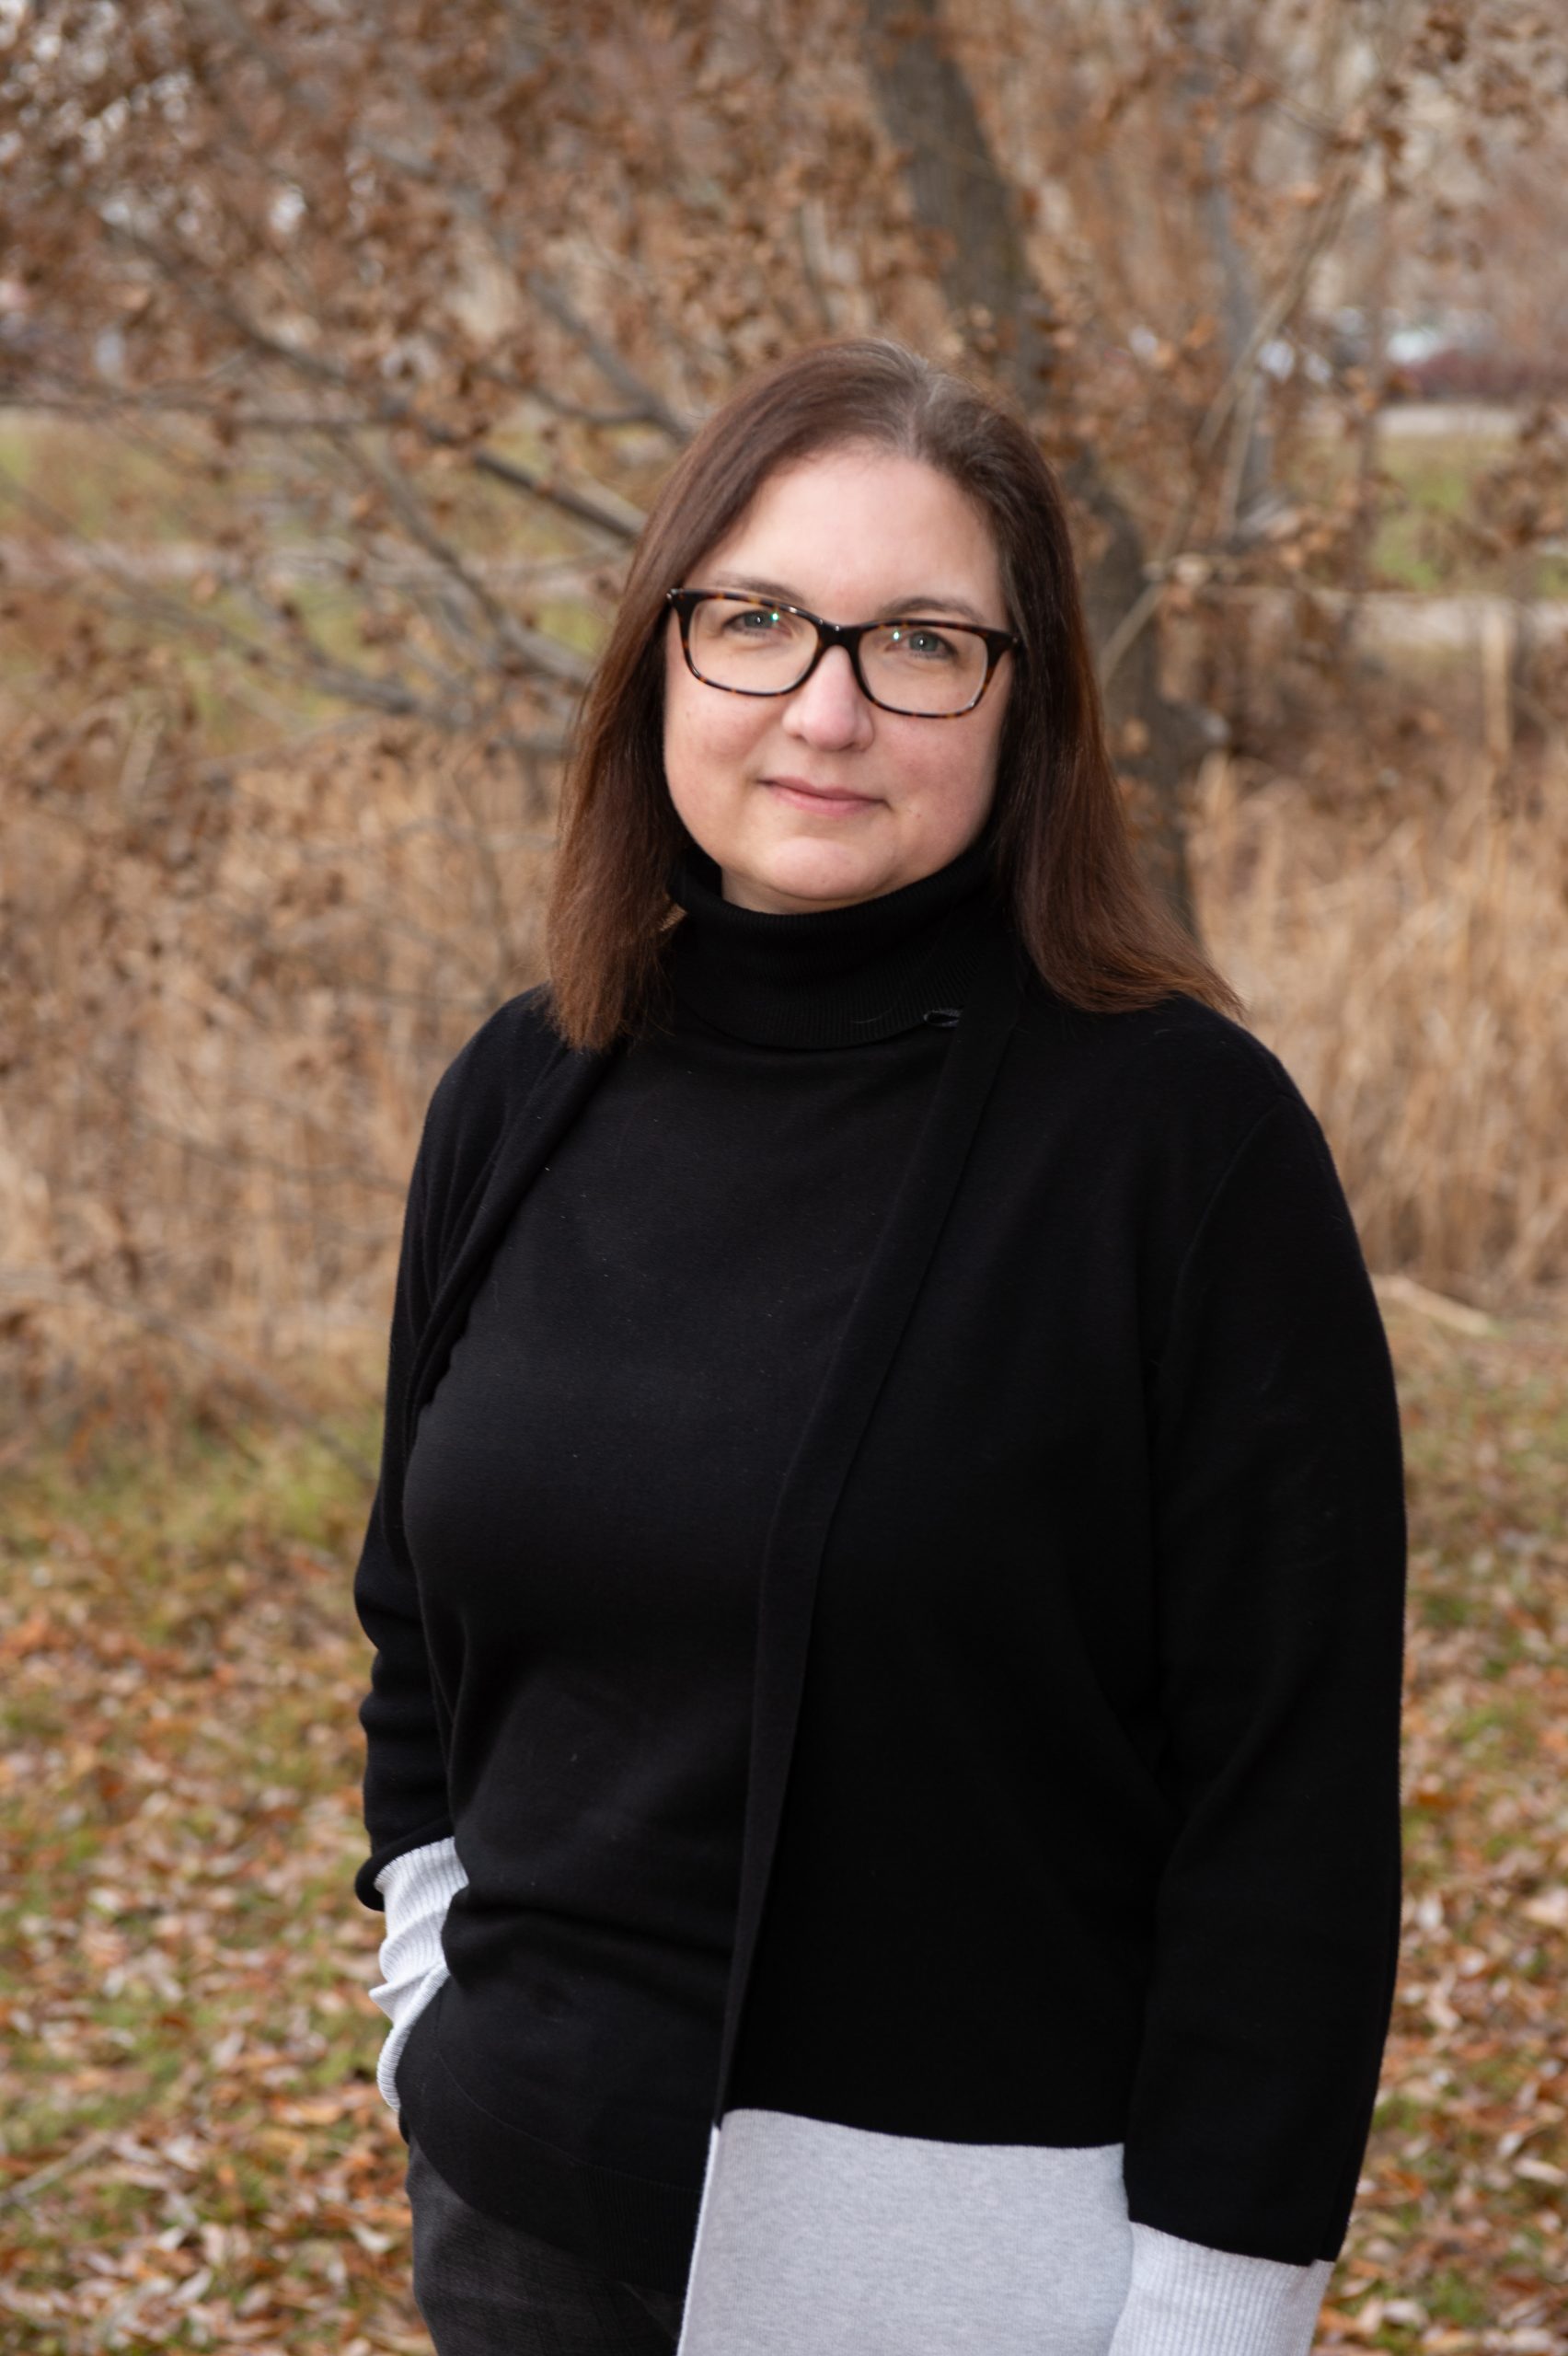 Dr. Julie Kosteniuk is an assistant professor at the University of Saskatchewan’s Canadian Centre for Rural and Agricultural Heath. (Photo by Debra Marshall).